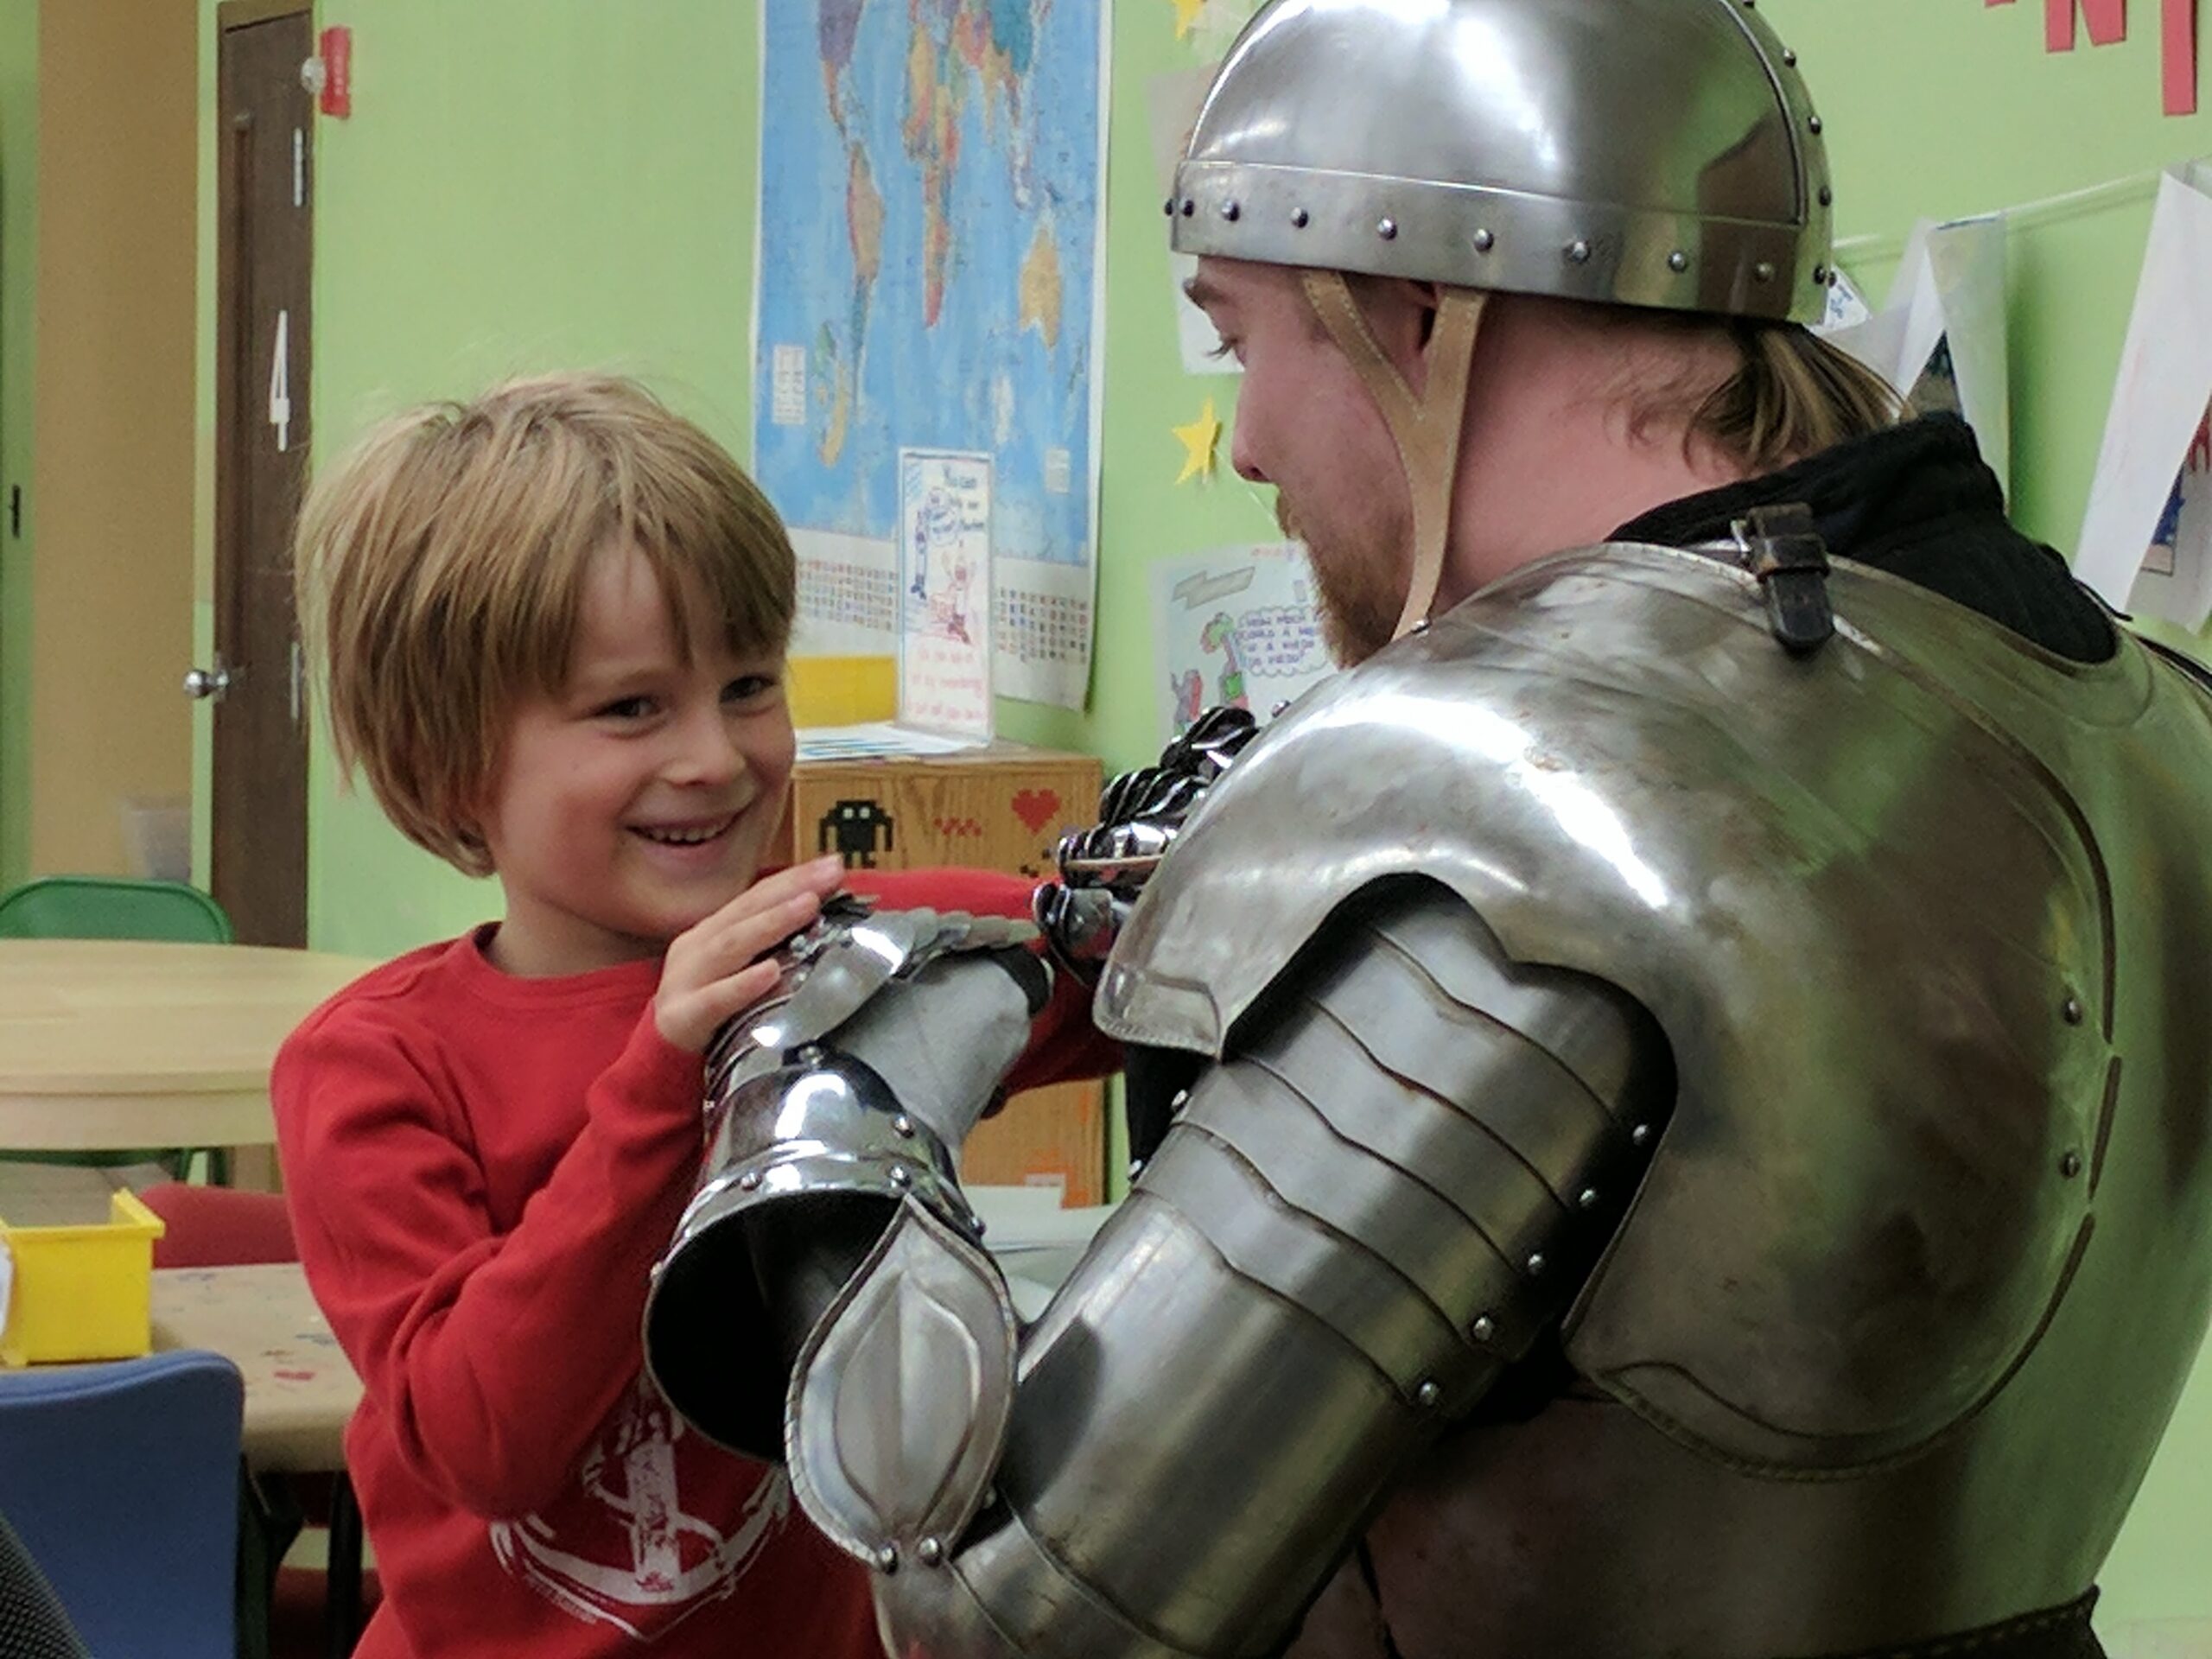 Image shows a teacher in historical plate armor holding his hand out to a child.